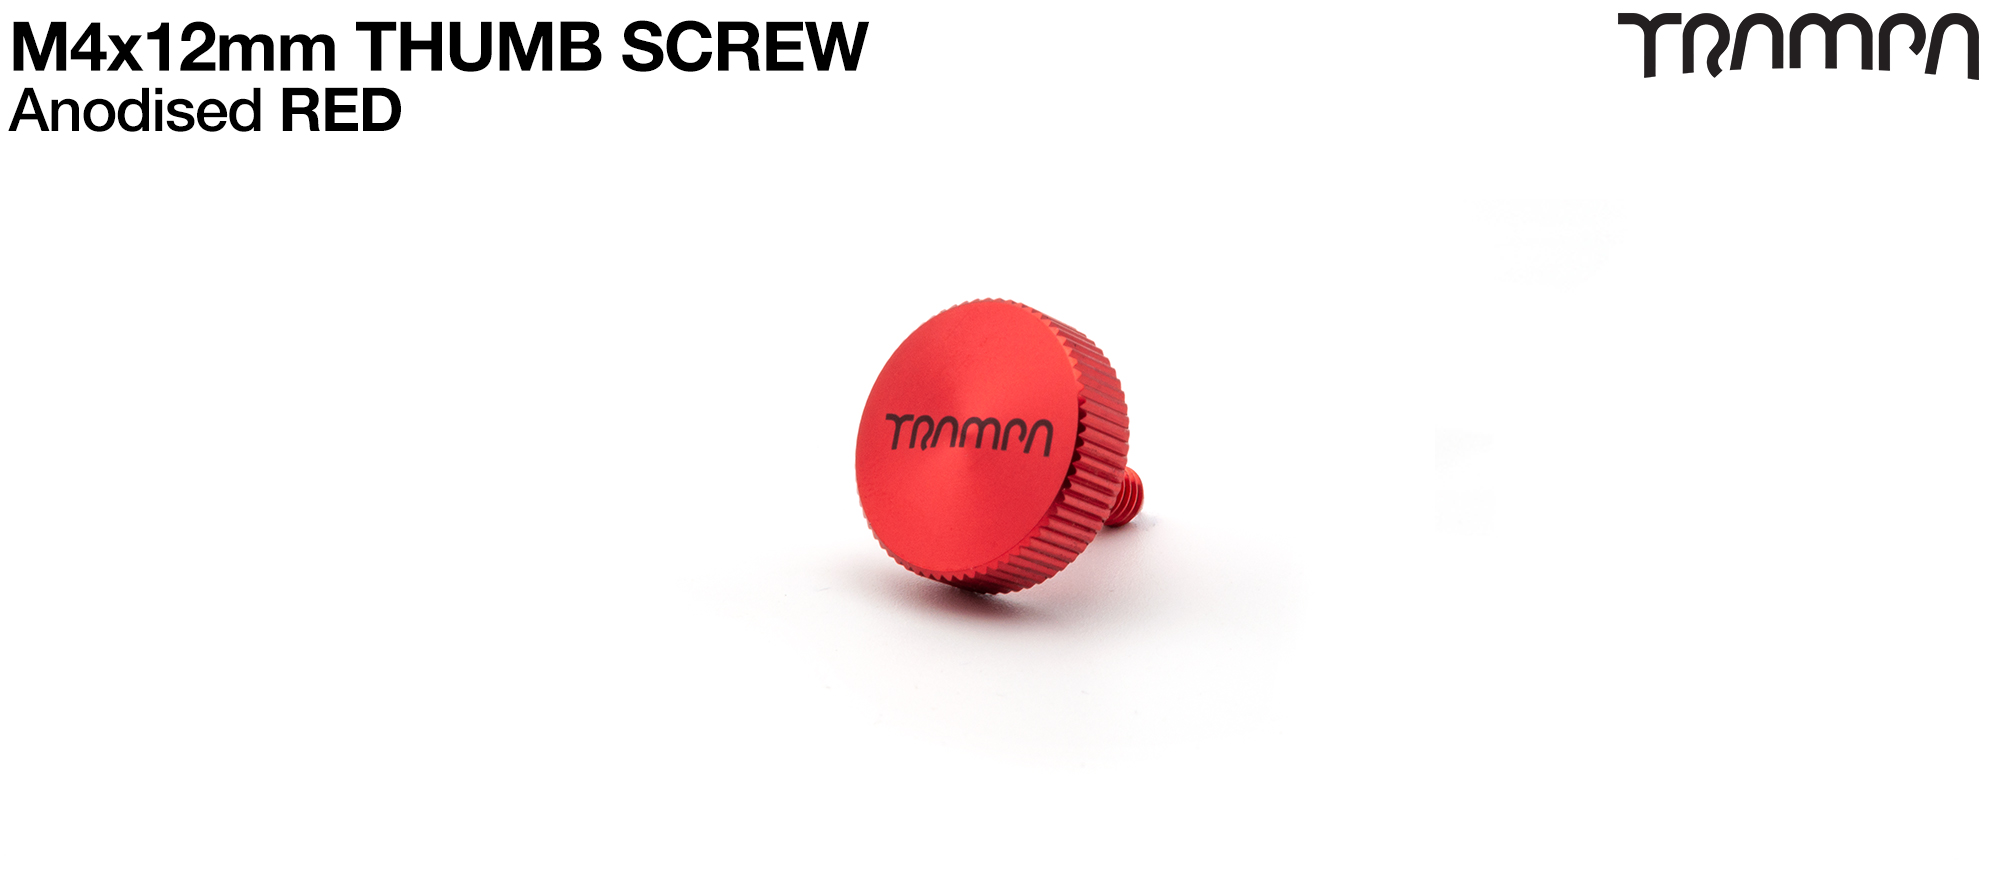 Inspection Pit Thumb Screw - RED 